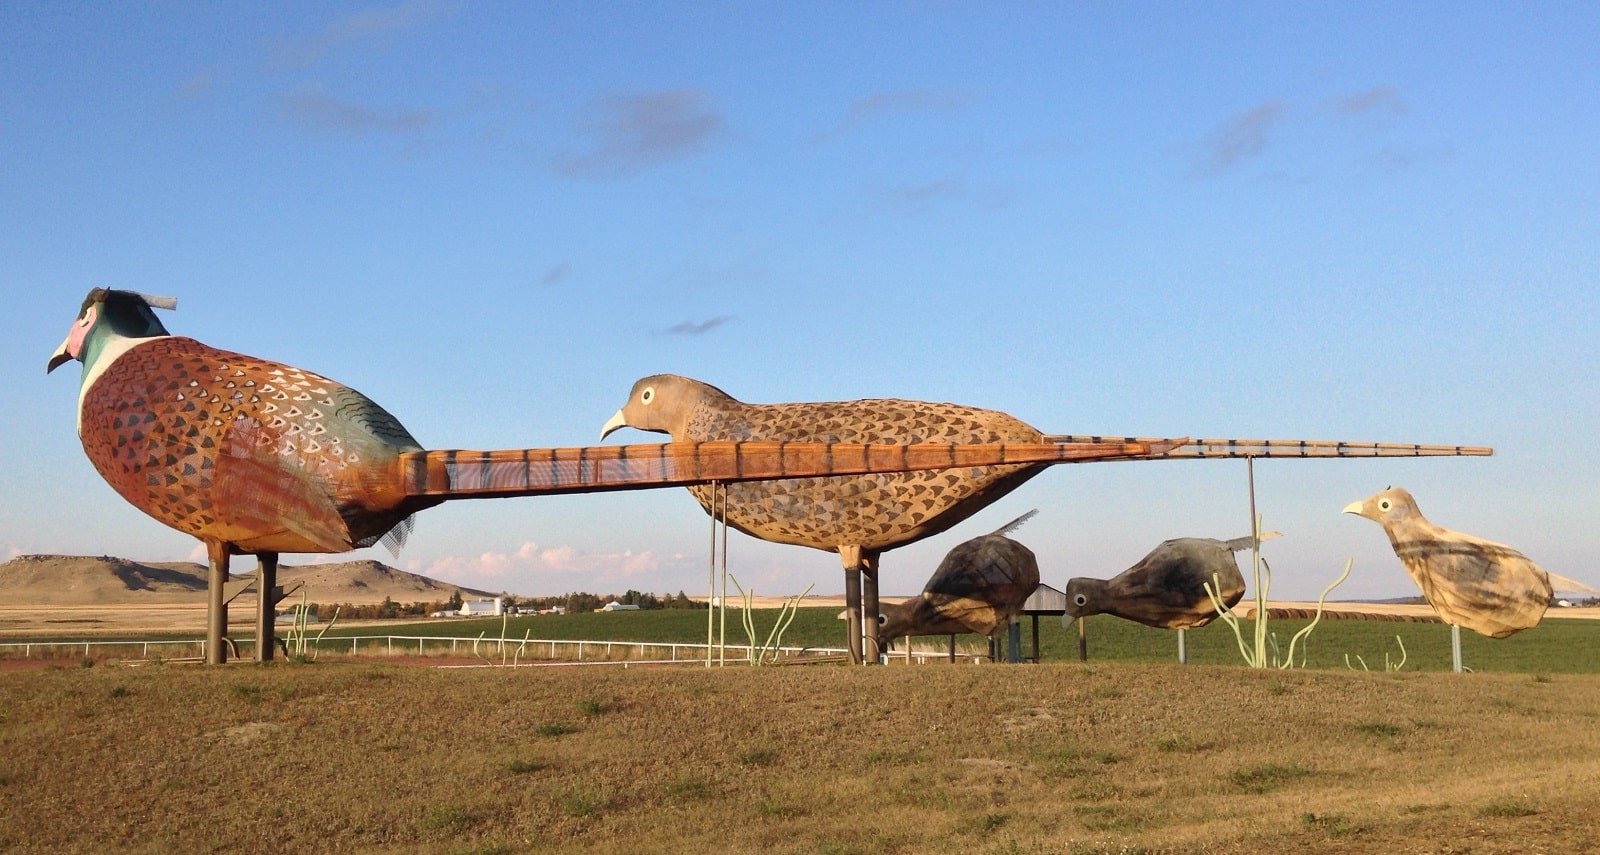 <p><span>The Enchanted Highway in North Dakota offers a unique driving experience with its series of large scrap metal sculptures. Stretching 32 miles from Gladstone to Regent, these sculptures, including “Geese in Flight” and “The Tin Family,” are among the world’s largest. </span></p> <p><span>Created by local artist Gary Greff to revive his hometown of Regent, the sculptures turn the highway into an open-air art gallery. The drive itself is a peaceful journey through North Dakota’s picturesque landscapes.</span></p> <p><b>Insider’s Tip: </b><span>End your drive in Regent to visit the Enchanted Highway Gift Shop.</span></p> <p><b>When To Travel: </b><span>Best visited in the summer or early fall for pleasant driving conditions.</span></p> <p><b>How To Get There: </b><span>Starts at Exit 72 on I-94 near Gladstone and ends in Regent.</span></p>